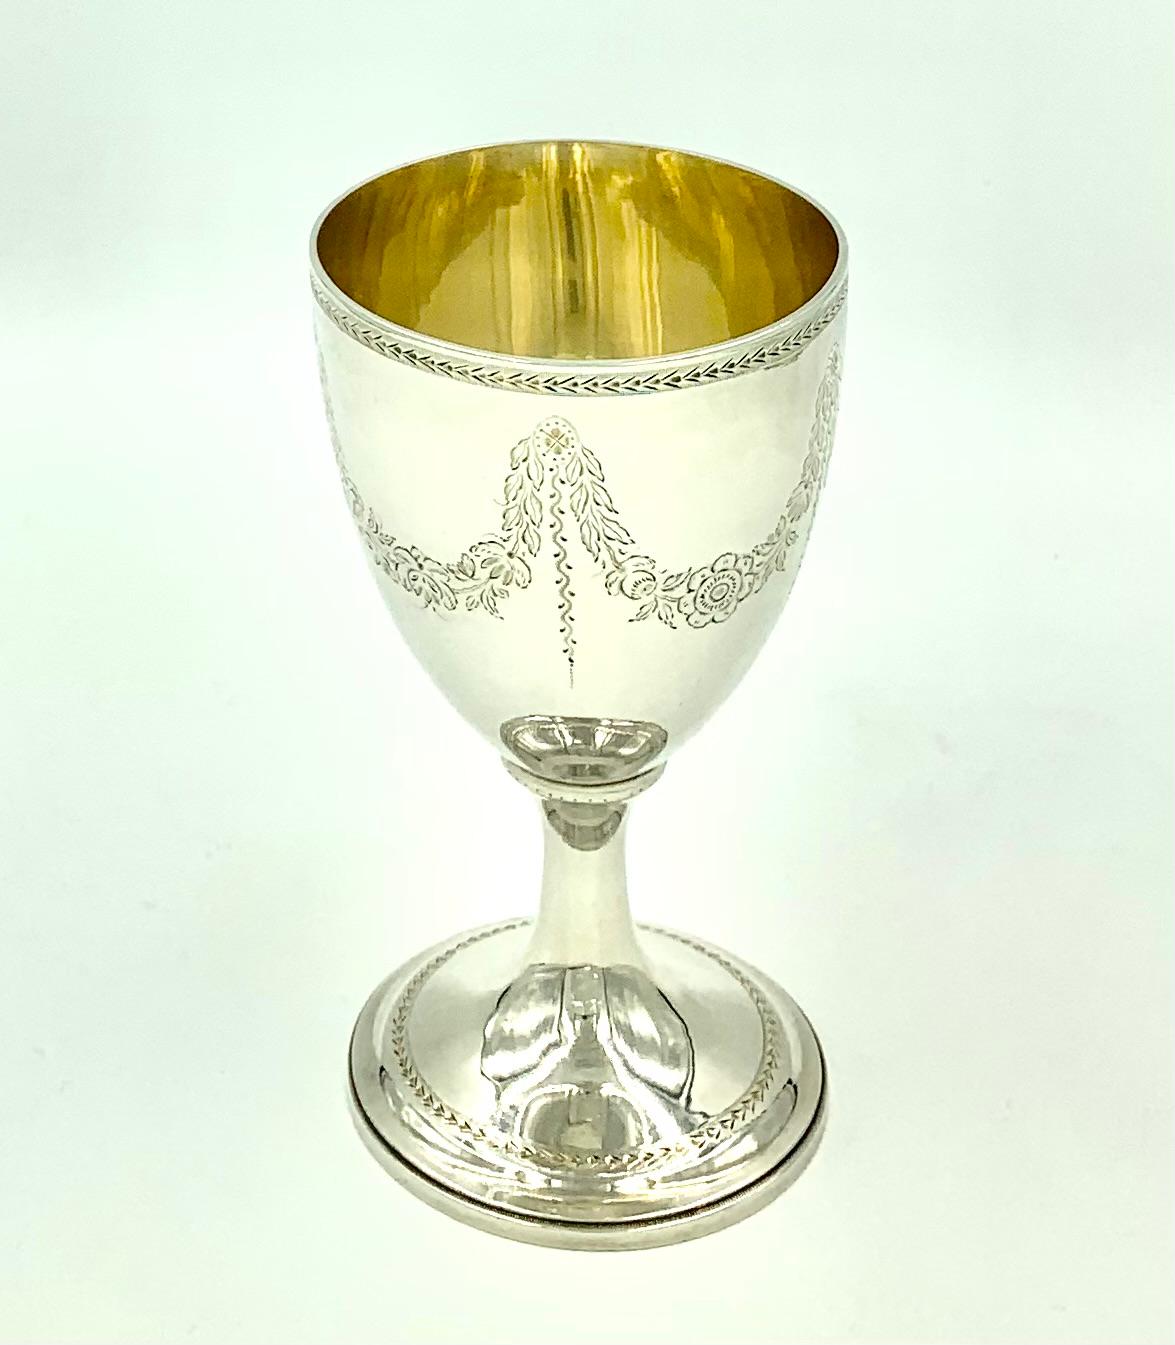 Very fine quality George III period sterling silver wine goblet
London, 1783.
Exceptional engraving on this piece, elegant garlands of acanthus leaf and roses held by quatrefoil rosettes at each crest with a long, lovely decorative tendril.
Ornate